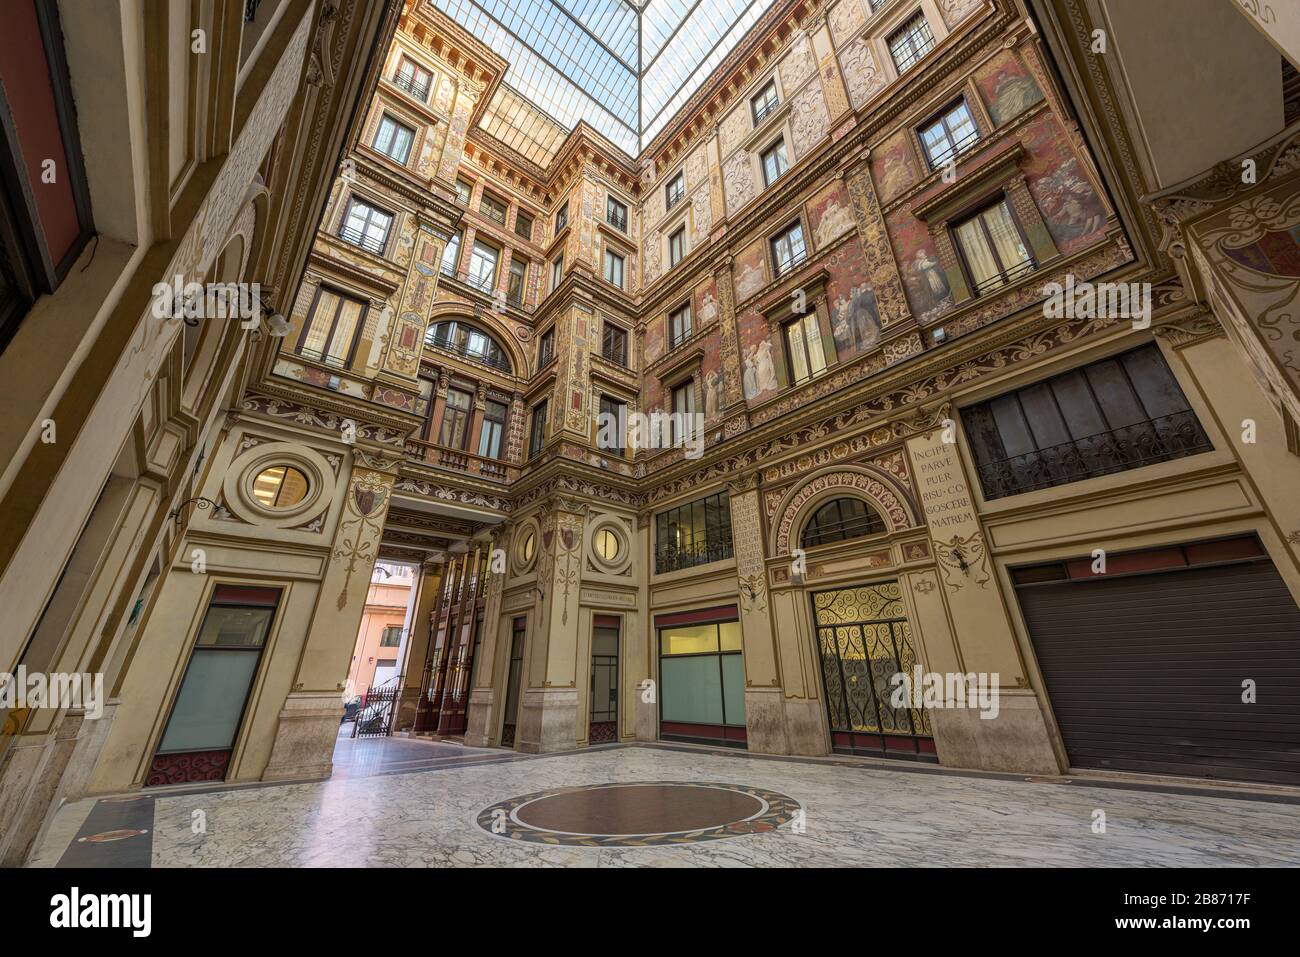 Covered passage of Galleria Sciarra building, decorated in Liberty Stile with allegoric paintings, in Trevi district of Rome, Italy Stock Photo